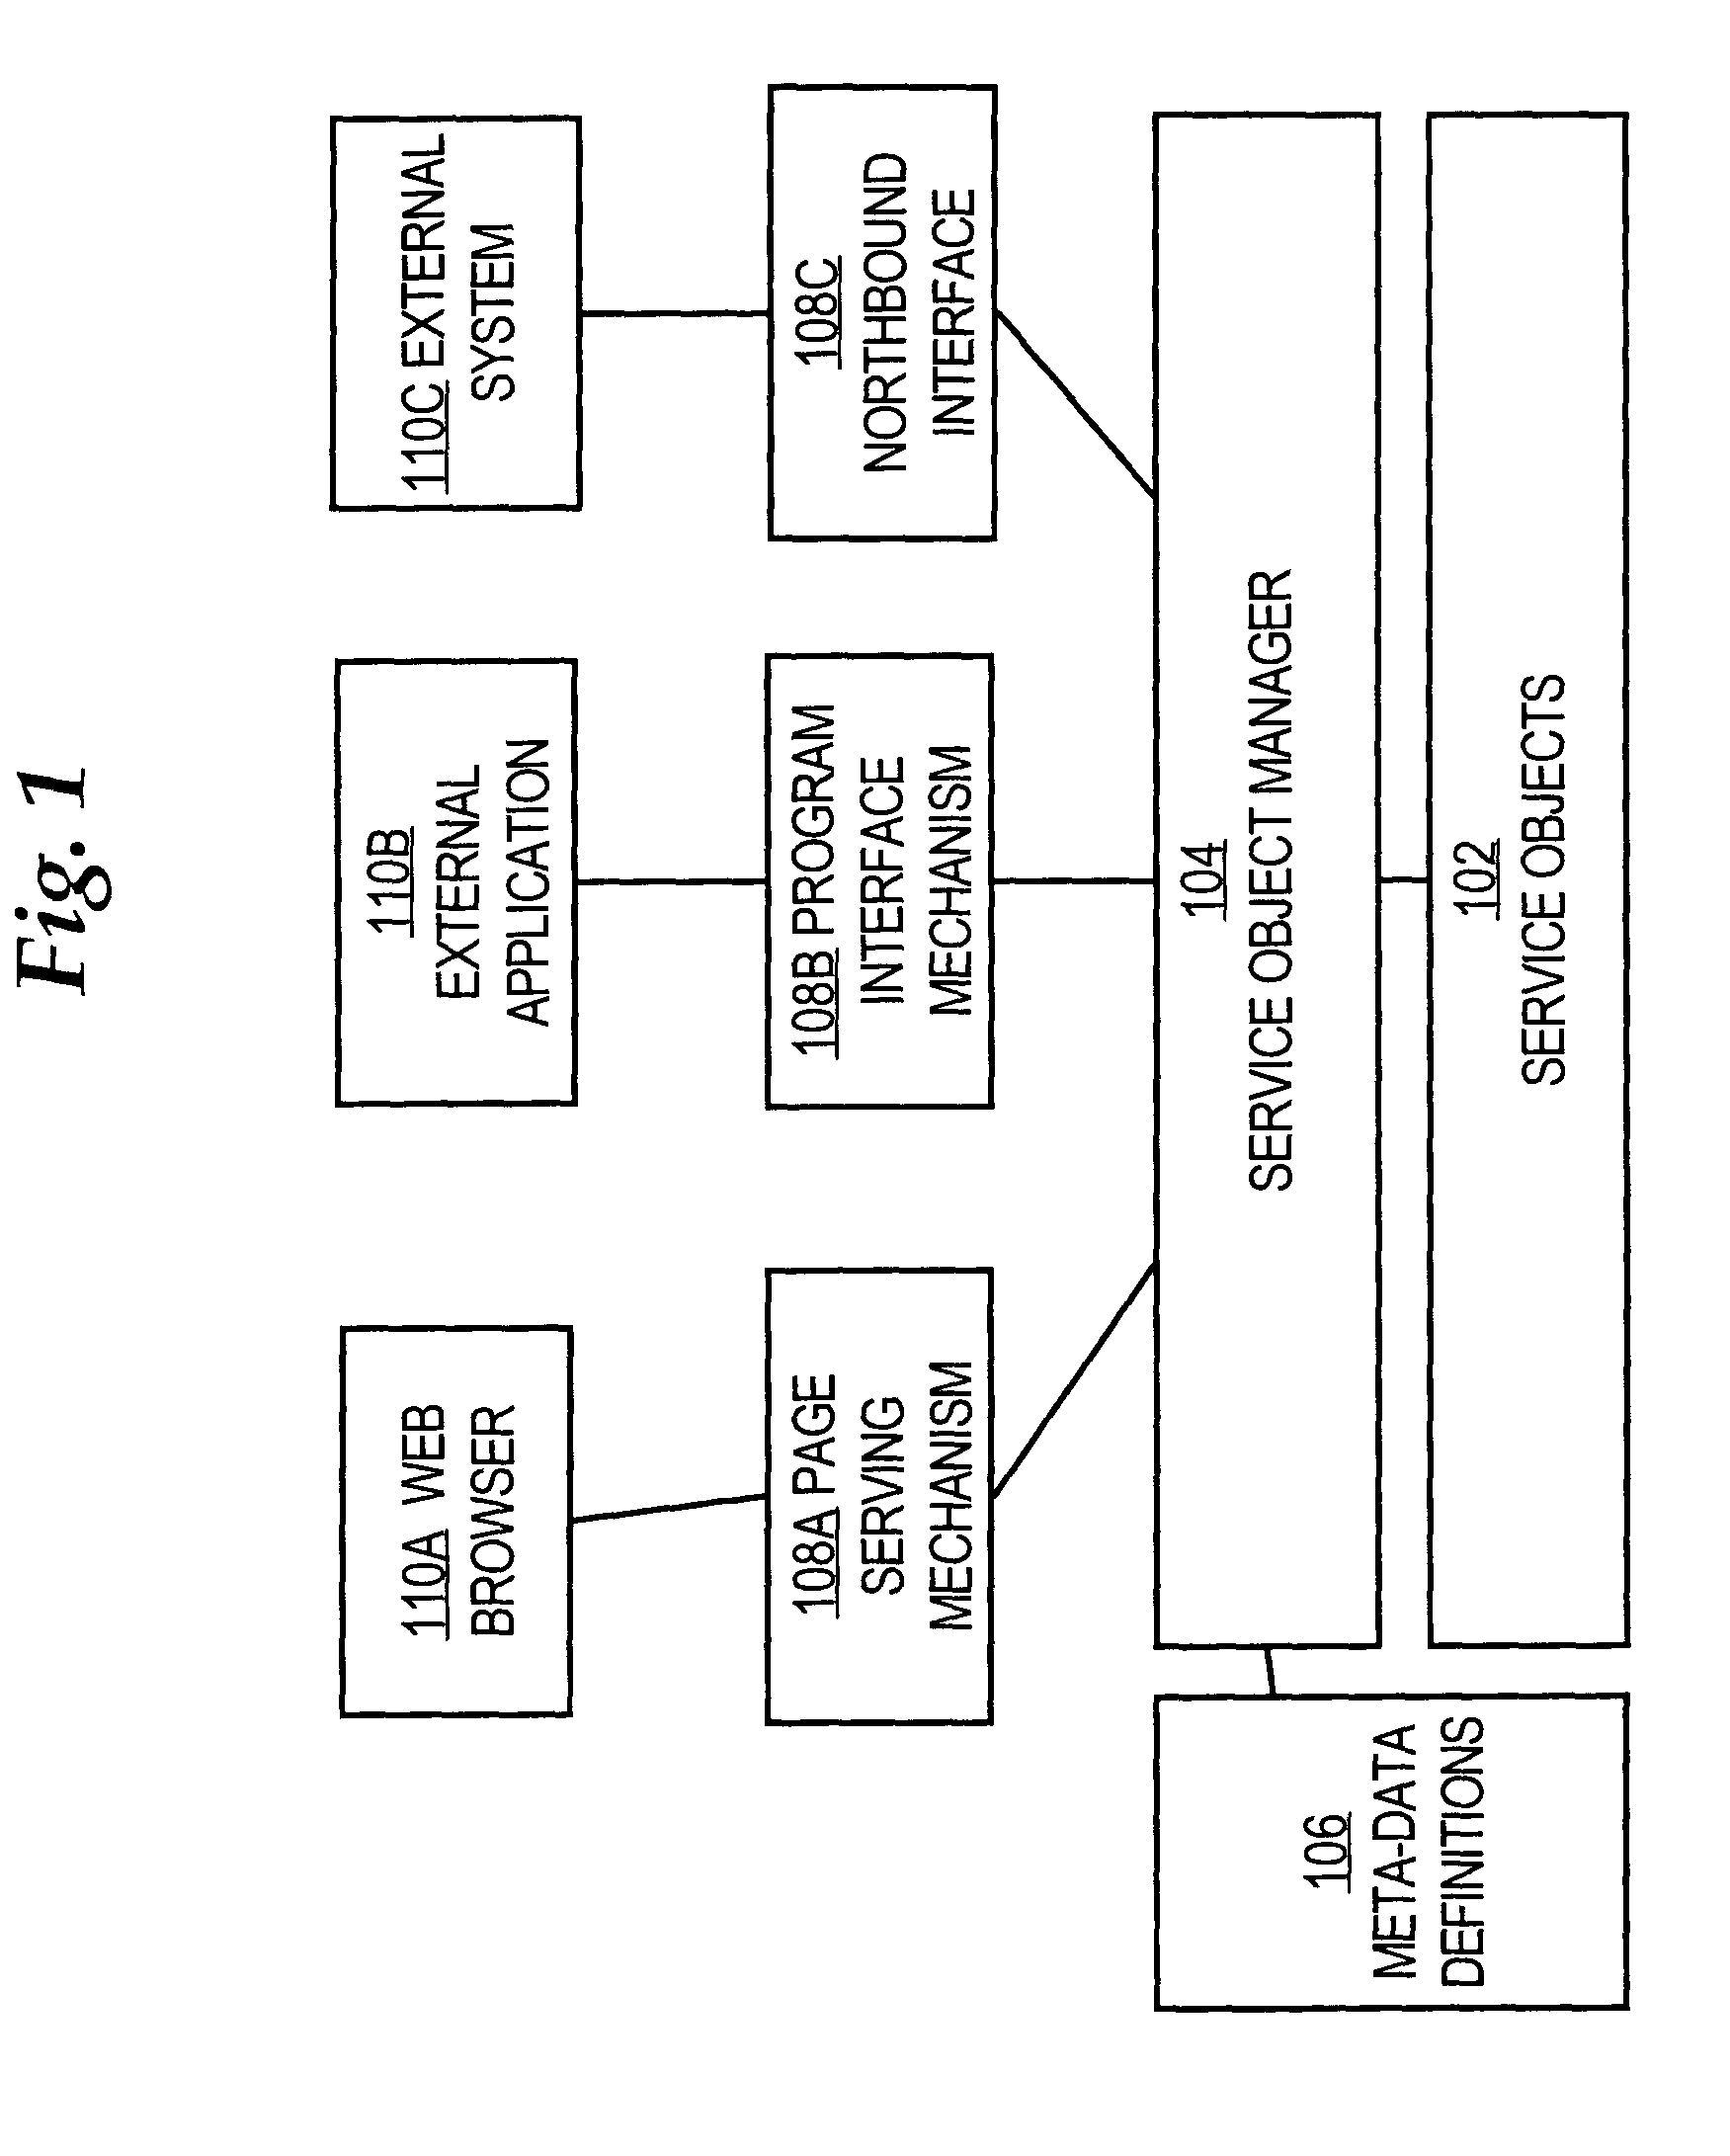 Method and apparatus for generating consistent user interfaces